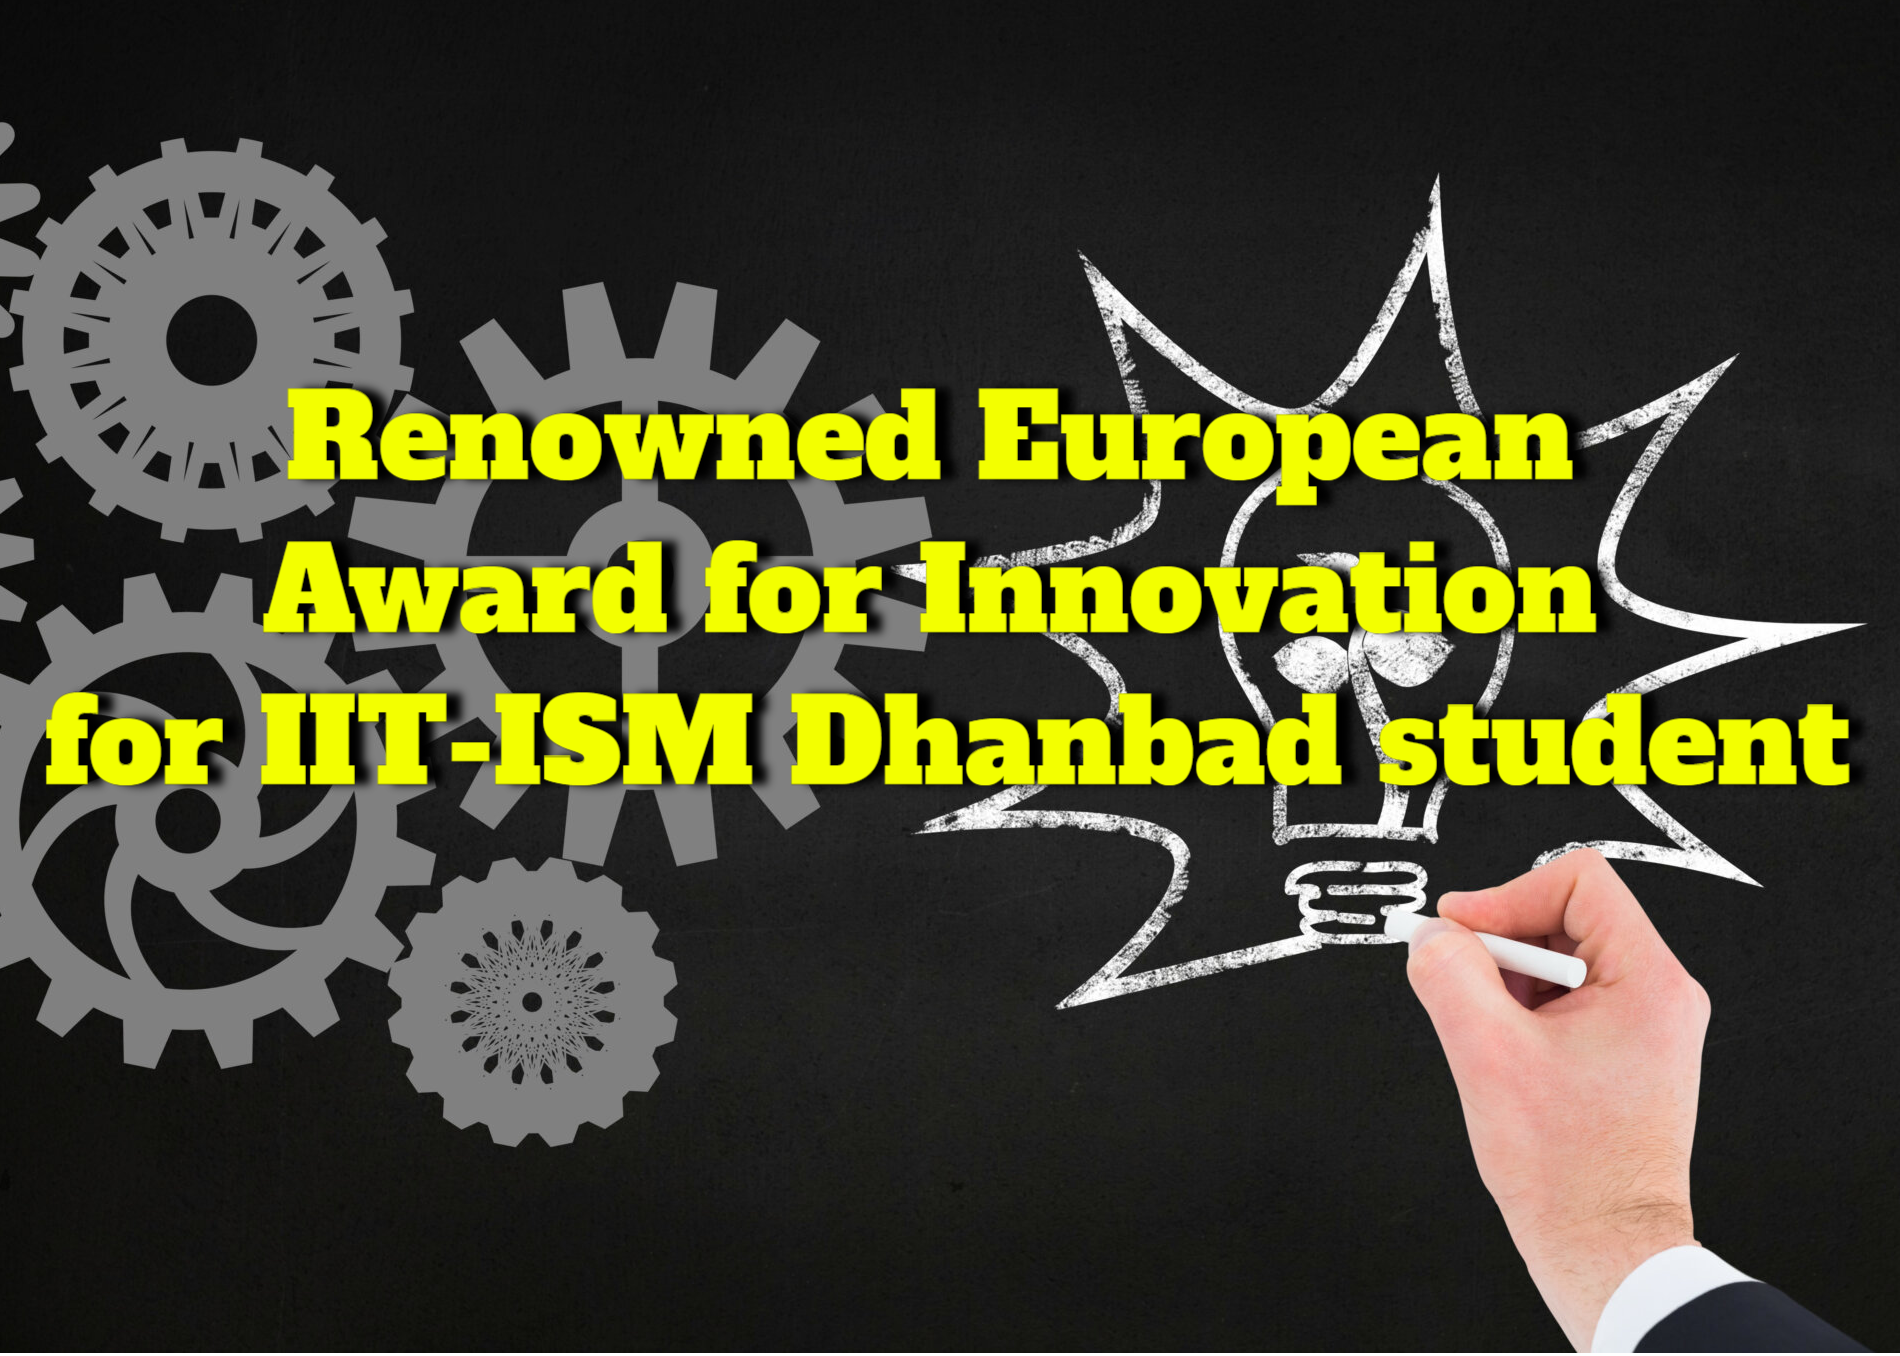 IIT-ISM Dhanbad student wins prestigious award for Innovation in Europe